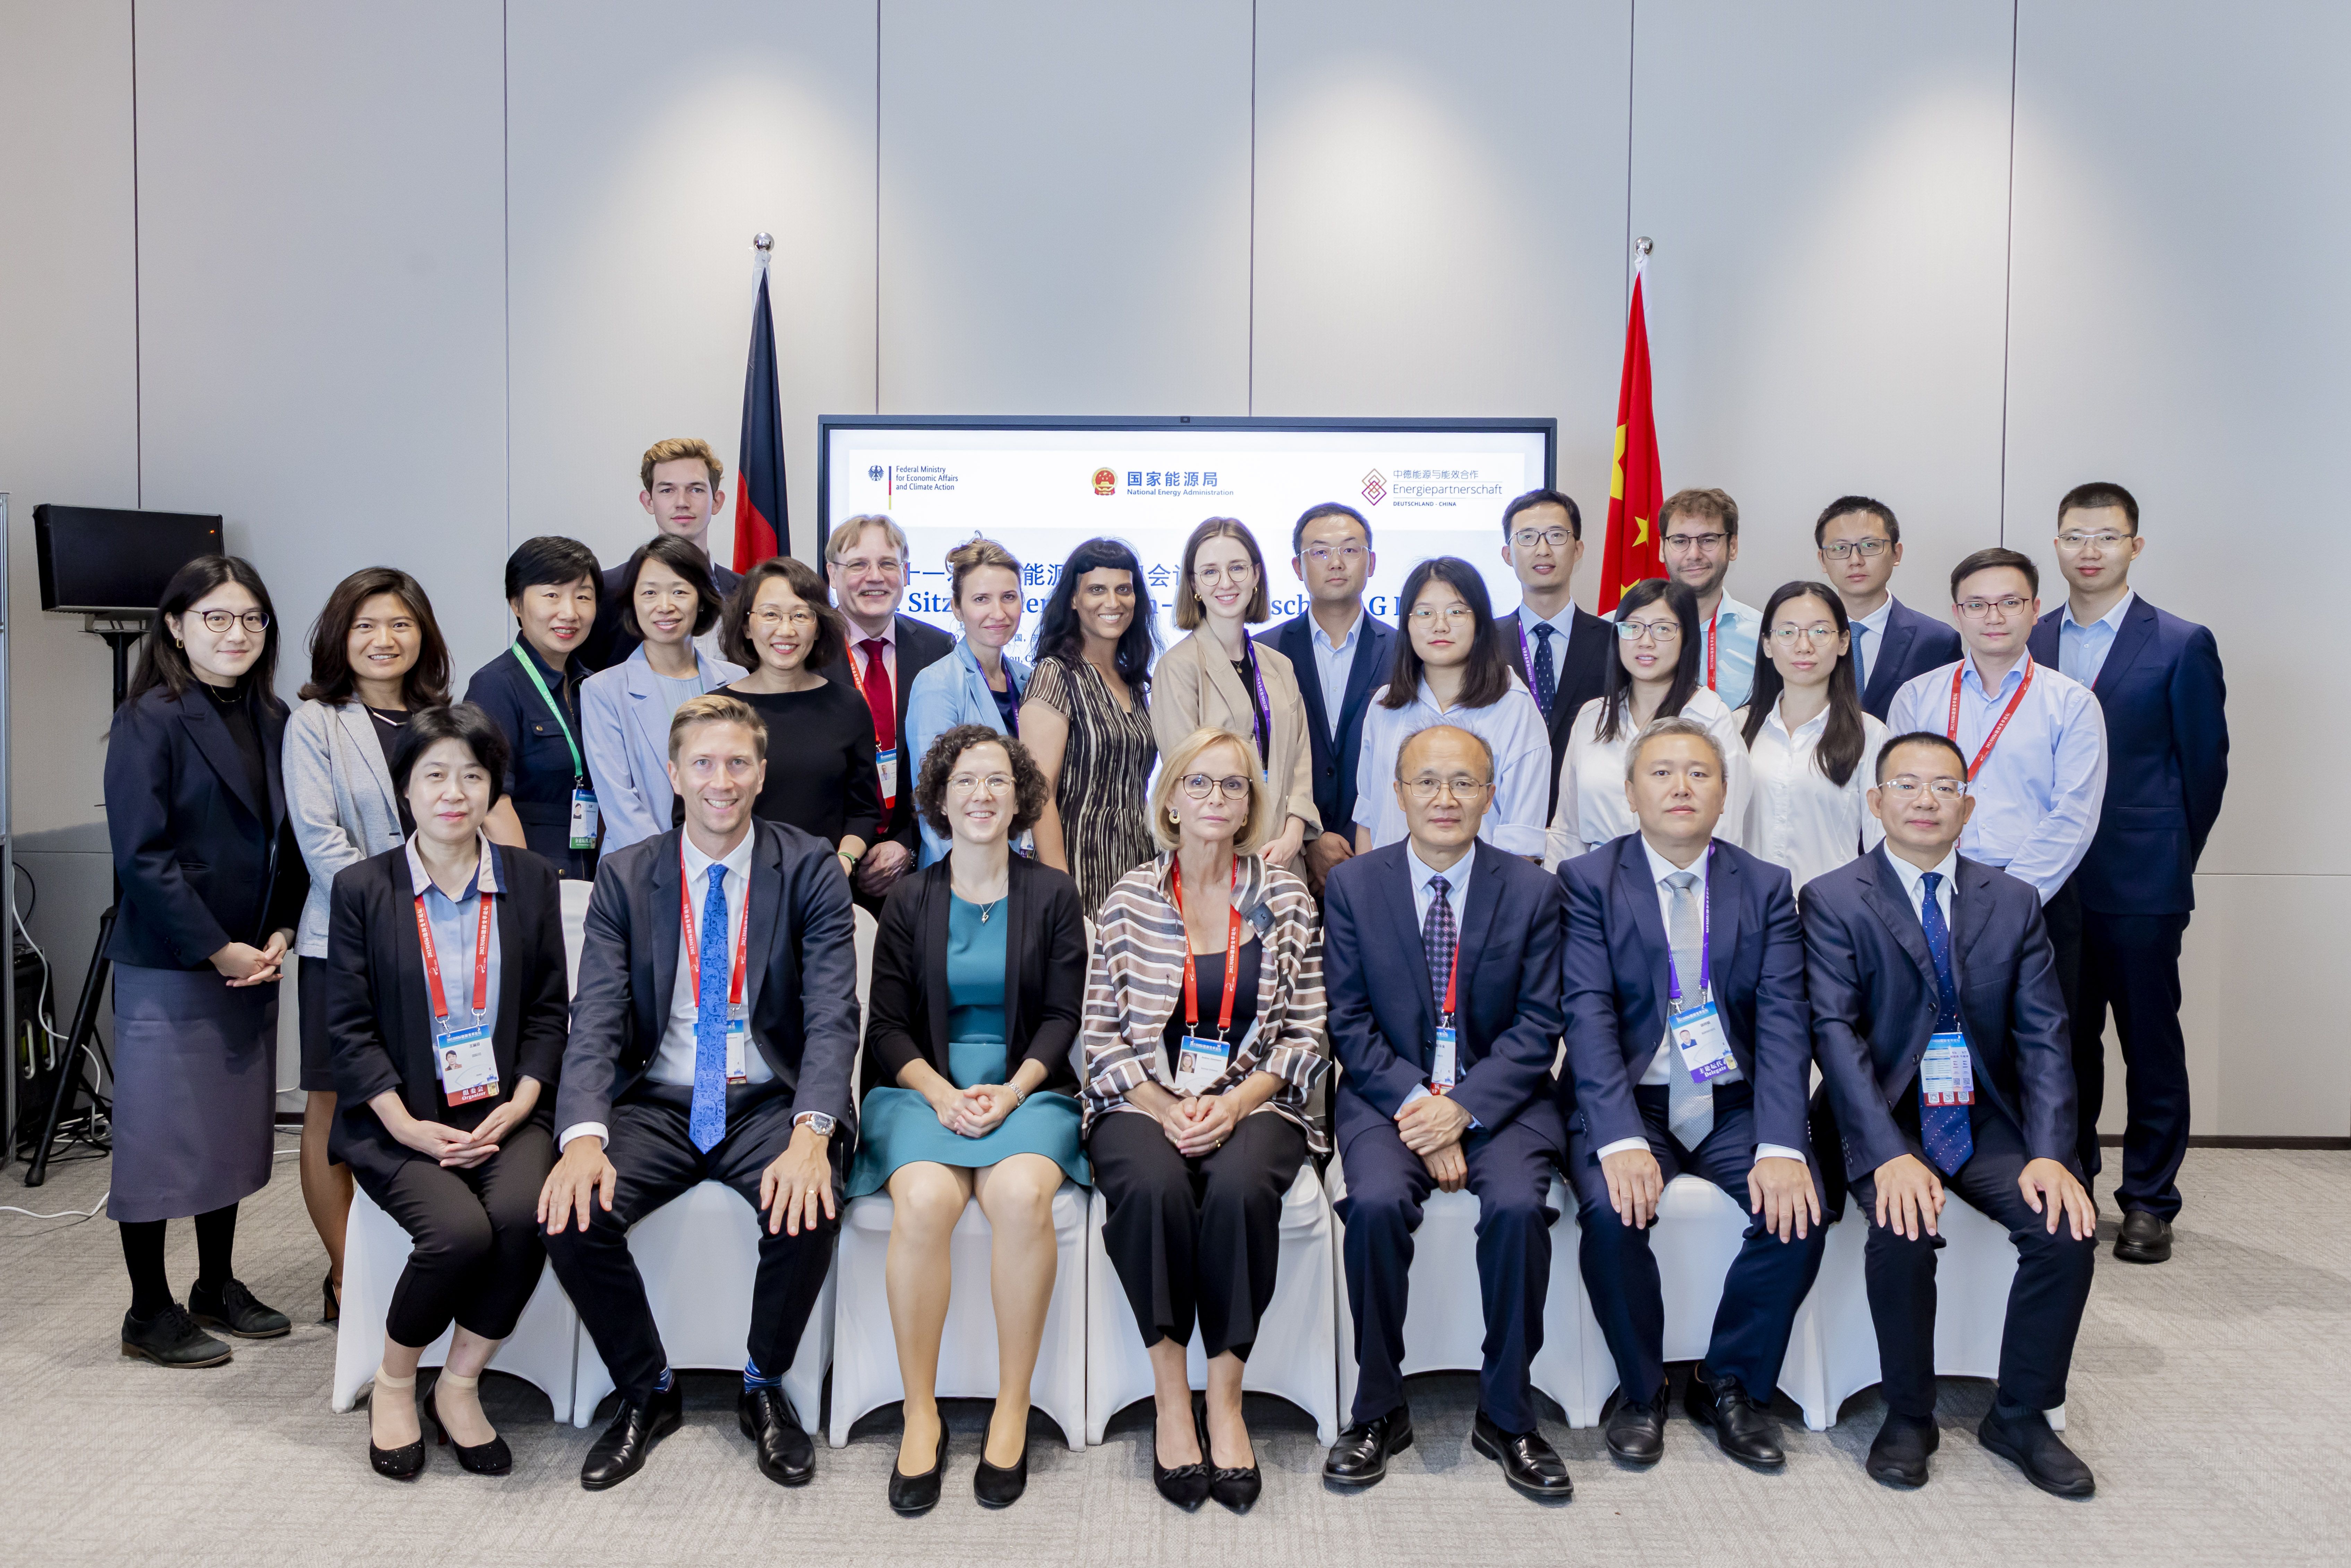 Participants of the 11th meeting of the Sino-German Working Group on Energy